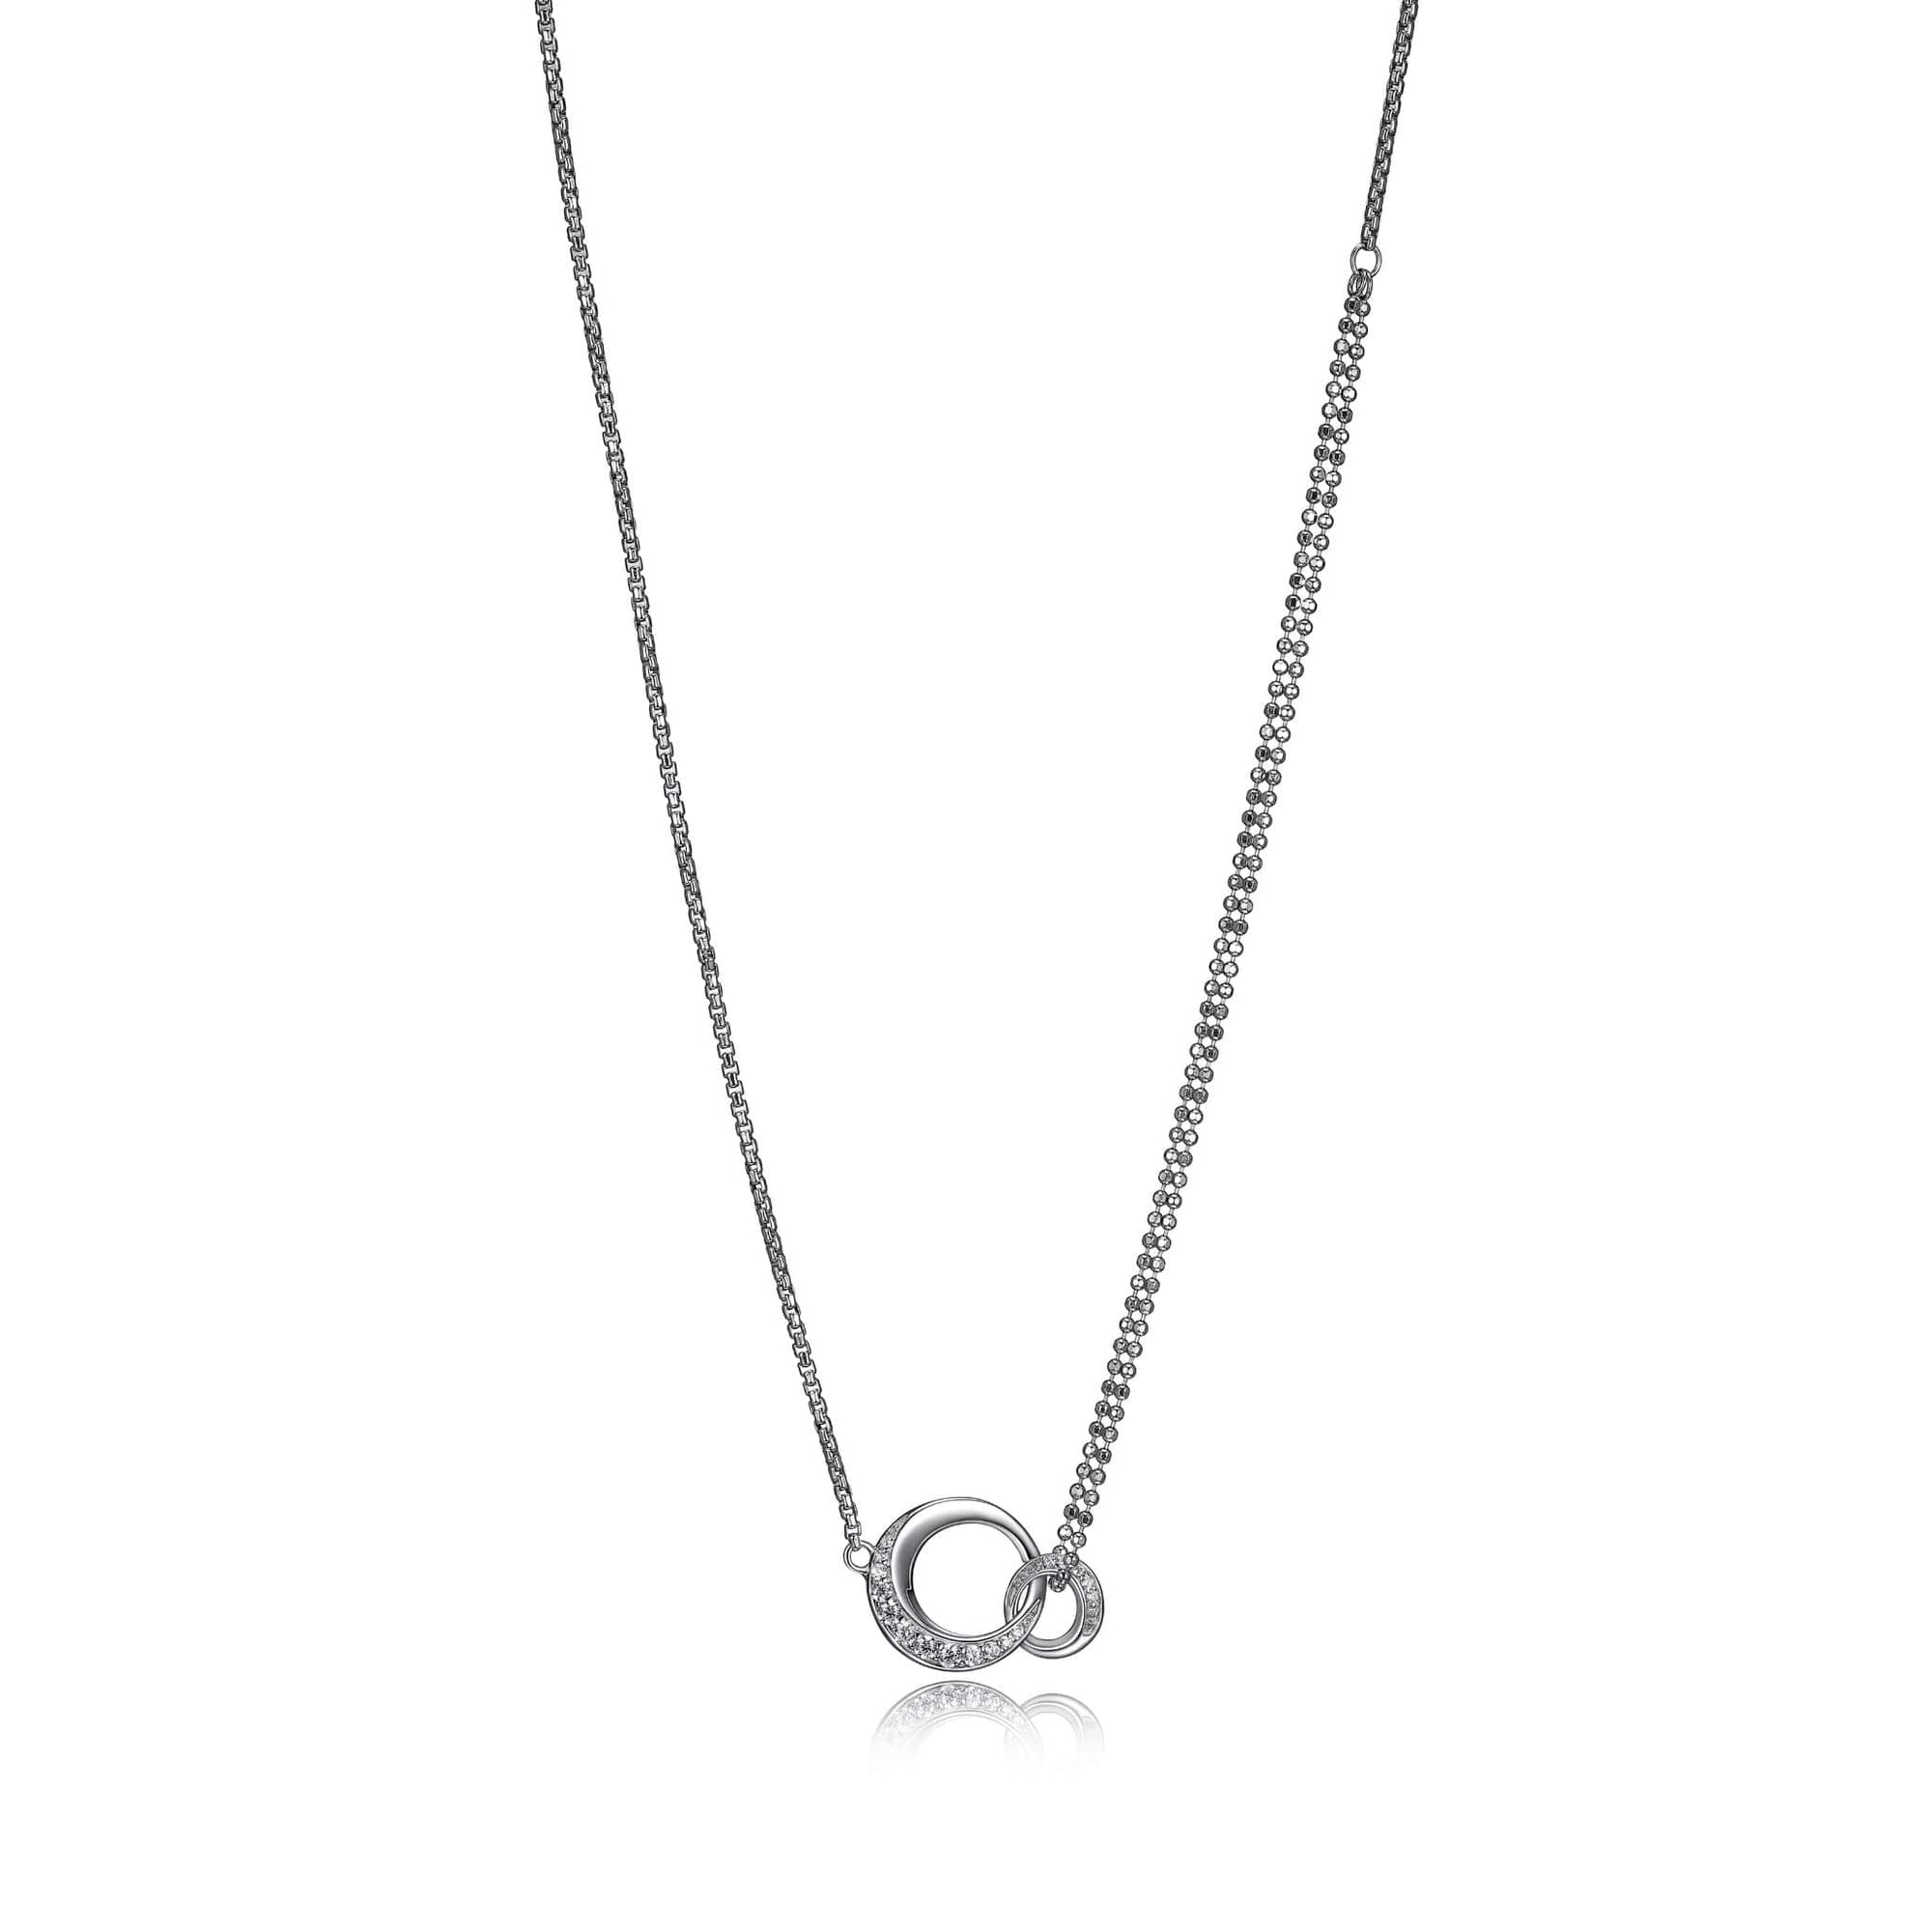 ELLE Hug Silver Necklace at Arman's Jewellers